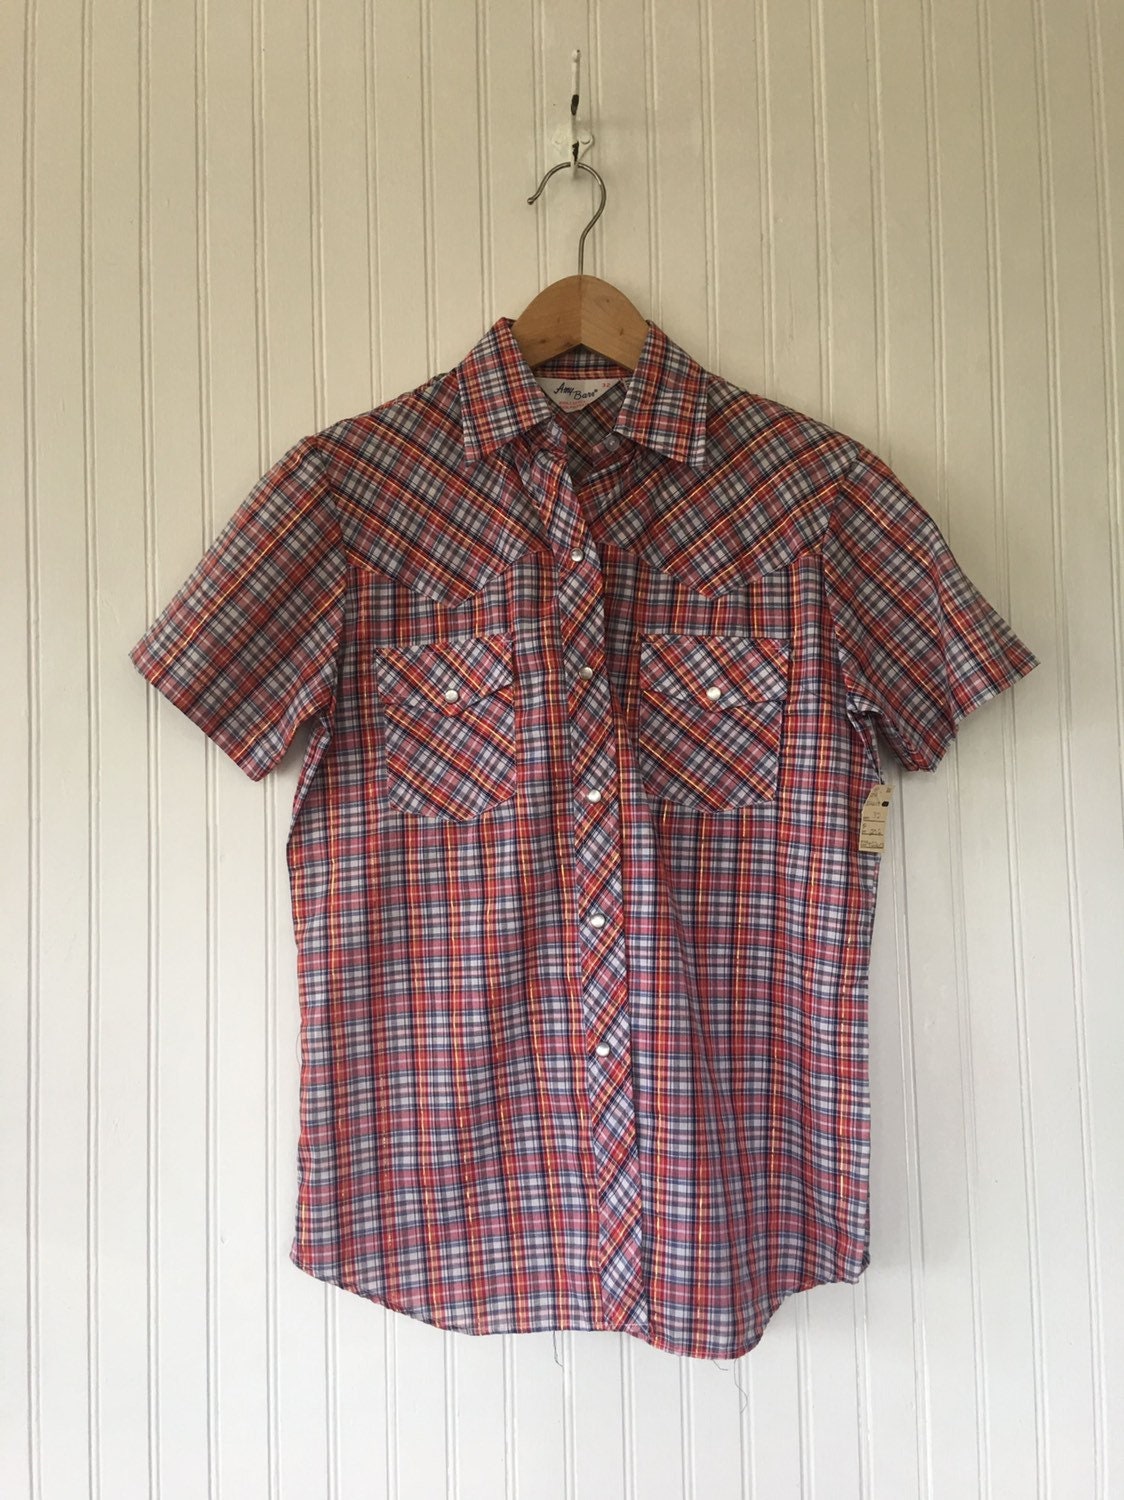 NWT Vintage Plaid Short Sleeve Top Size Small / Medium - White Red Blue ...